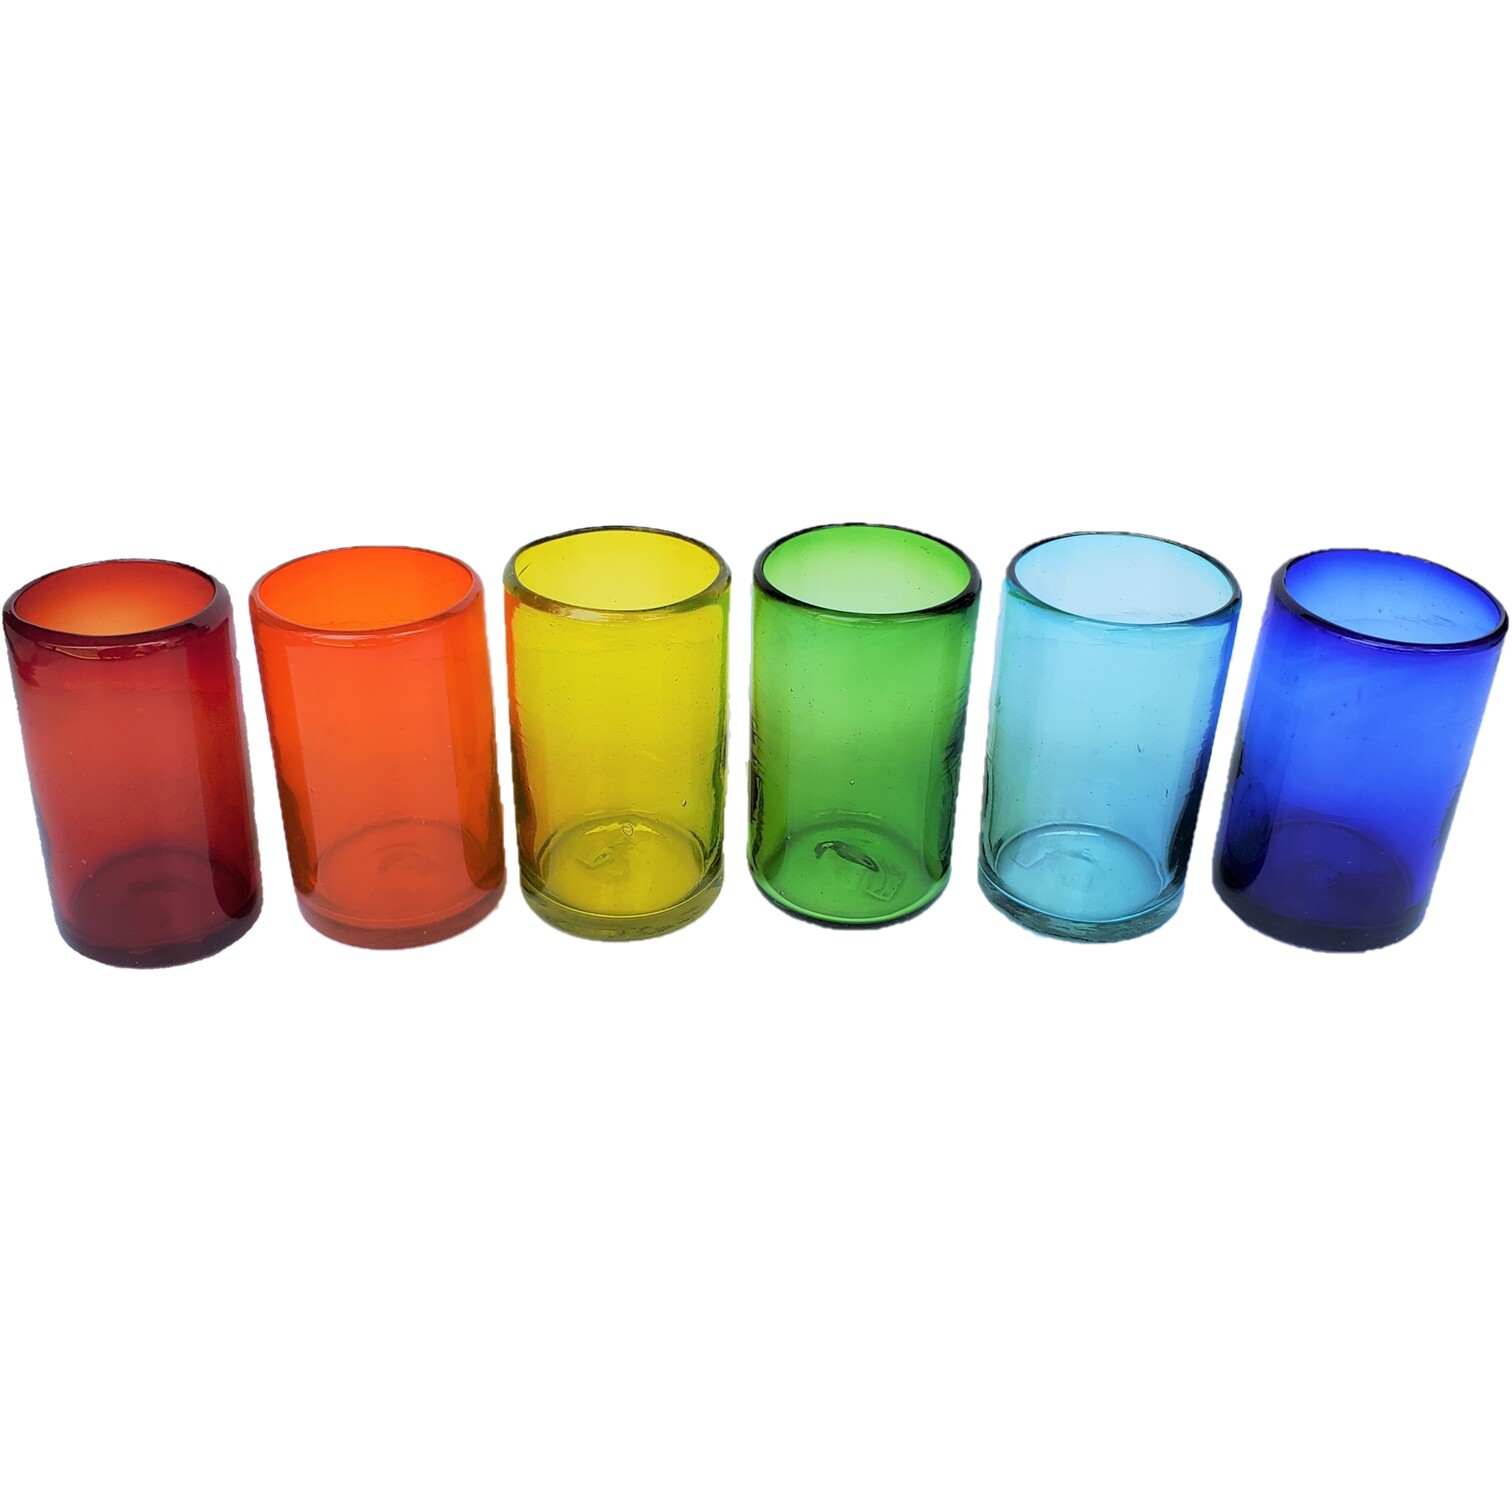 New Items / Rainbow Colored drinking glasses  / These handcrafted glasses deliver a classic touch to your favorite drink.